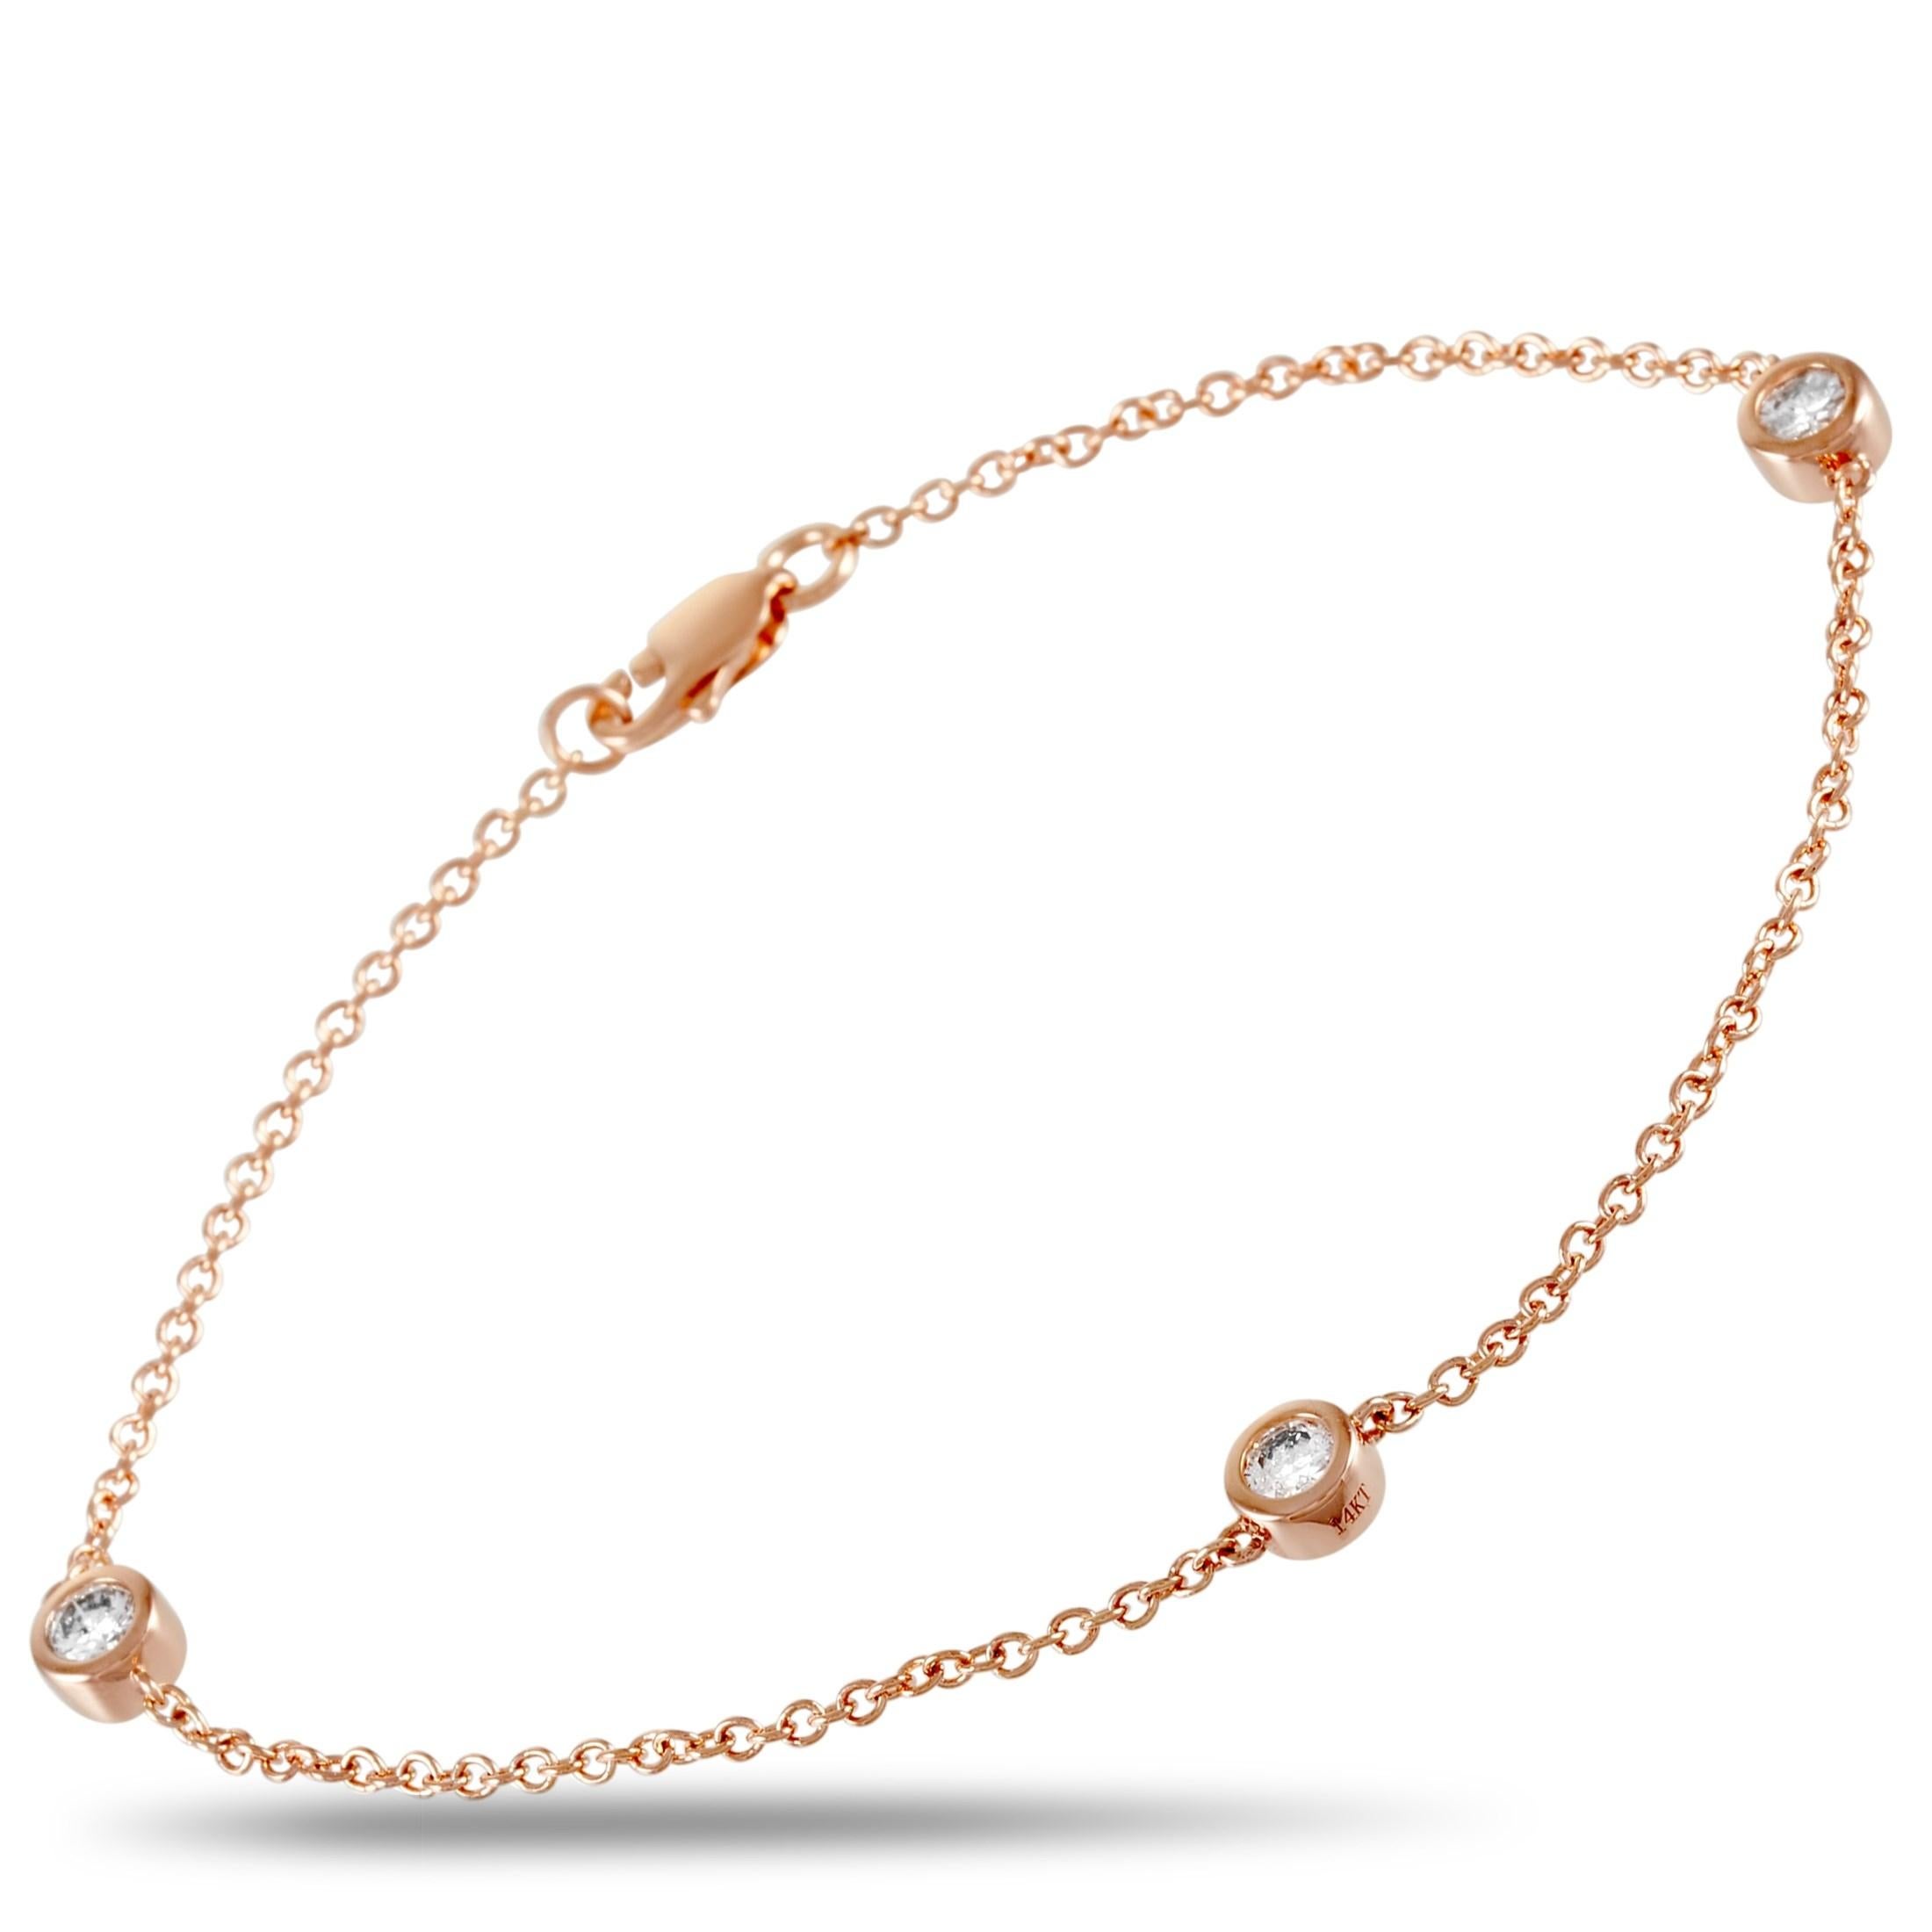 This LB Exclusive bracelet is crafted from 14K rose gold and weighs 2.2 grams, measuring 6.50” in length. It is set with diamonds that total 0.37 carats.

The bracelet is offered in brand-new condition and includes a gift box.